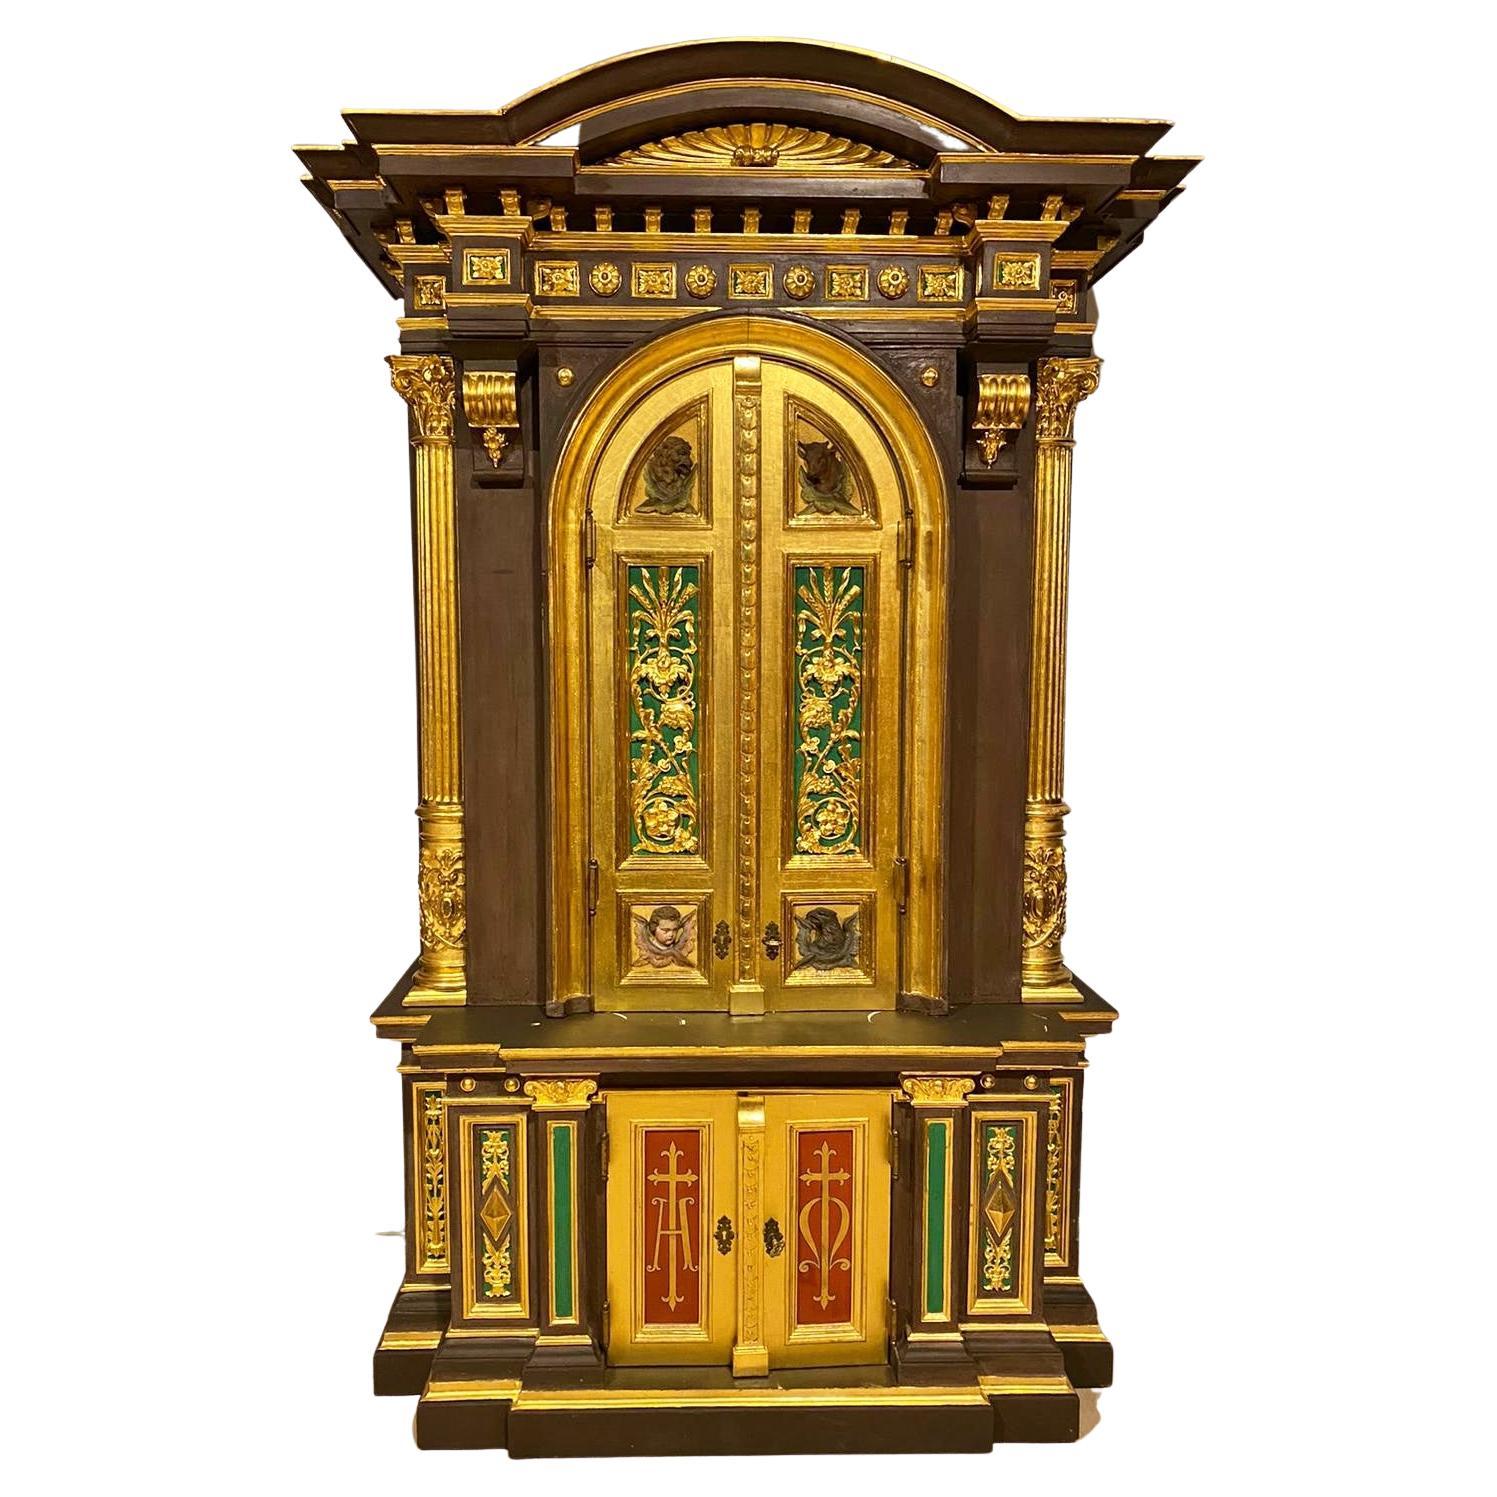 Monumental German Eclesiastical Cabinet of the 18th Century